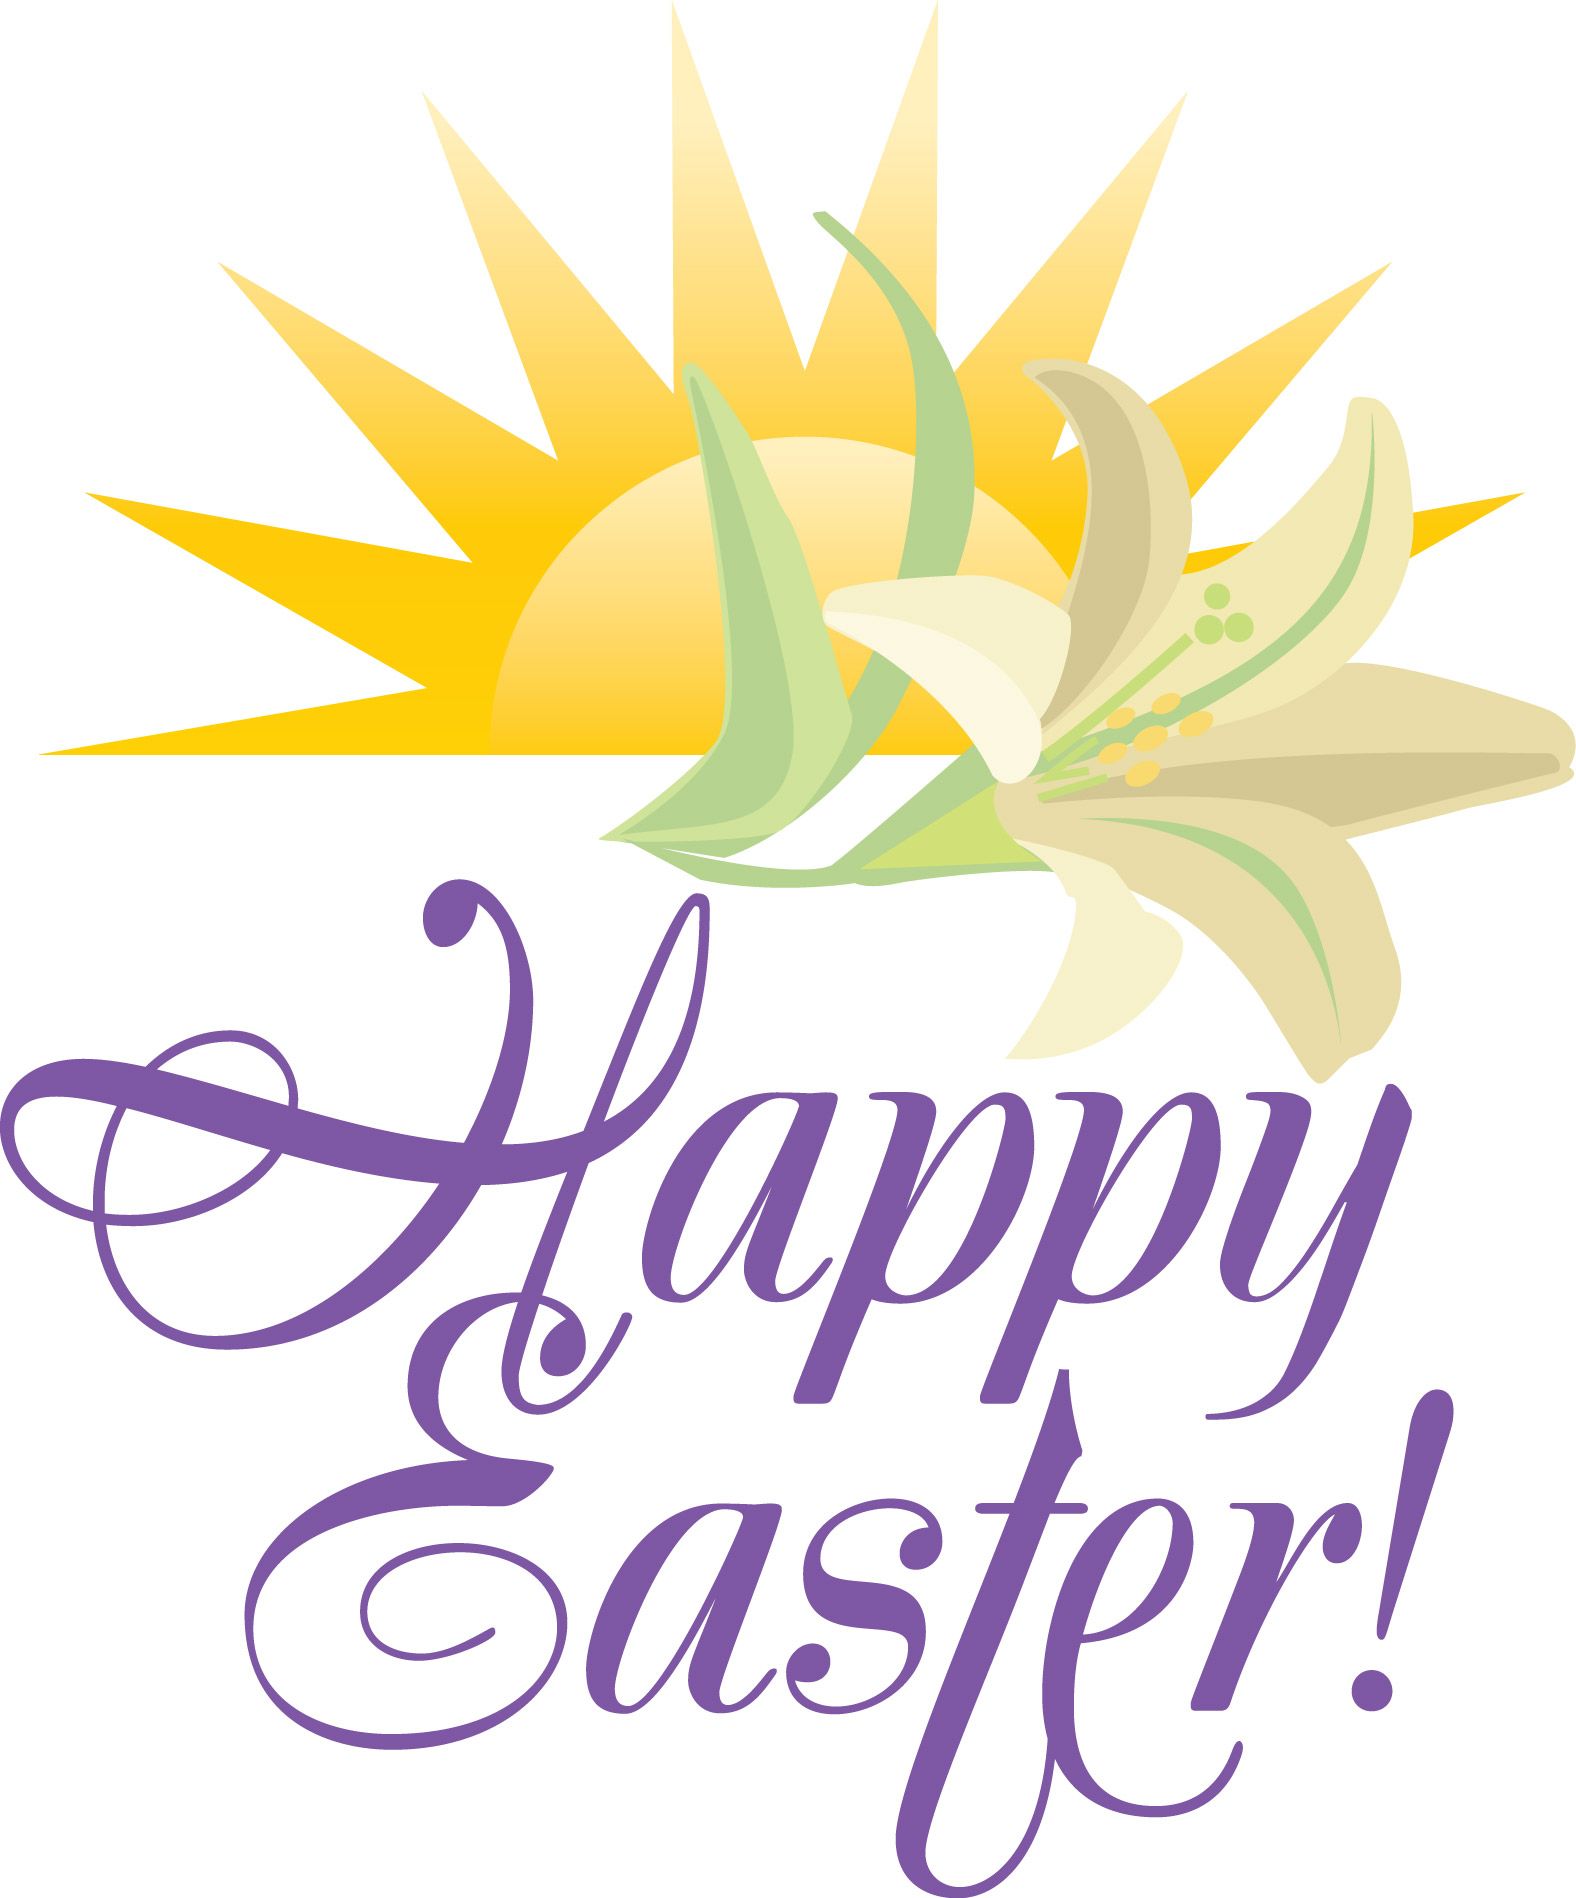 Pin by Sonalsharma on Happy Easter Images in